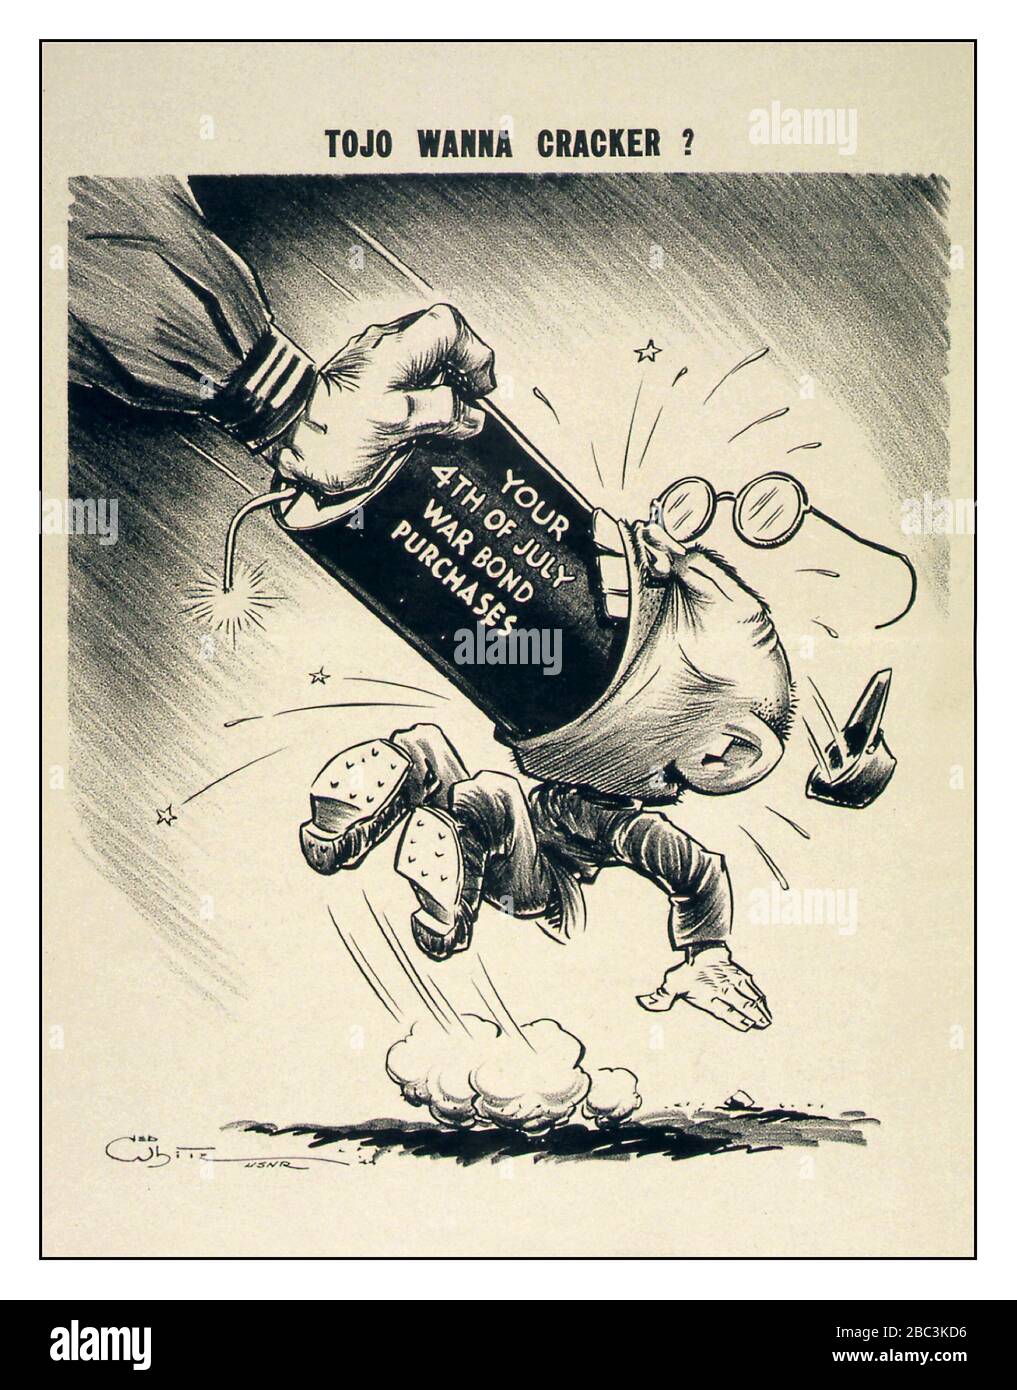 Vintage WW2 Cartoon caricature USA ' Tojo want a cracker' ? Your 4th of July war bond purchases ca. 1940s American war against Imperial Japan. Hideki Tojo (December 30, 1884 – December 23, 1948) was a Japanese politician and general of the Imperial Japanese Army served as Prime Minister of Japan and President of the Imperial Rule Assistance Association for the majority of World War II. Executed for war crimes Stock Photo